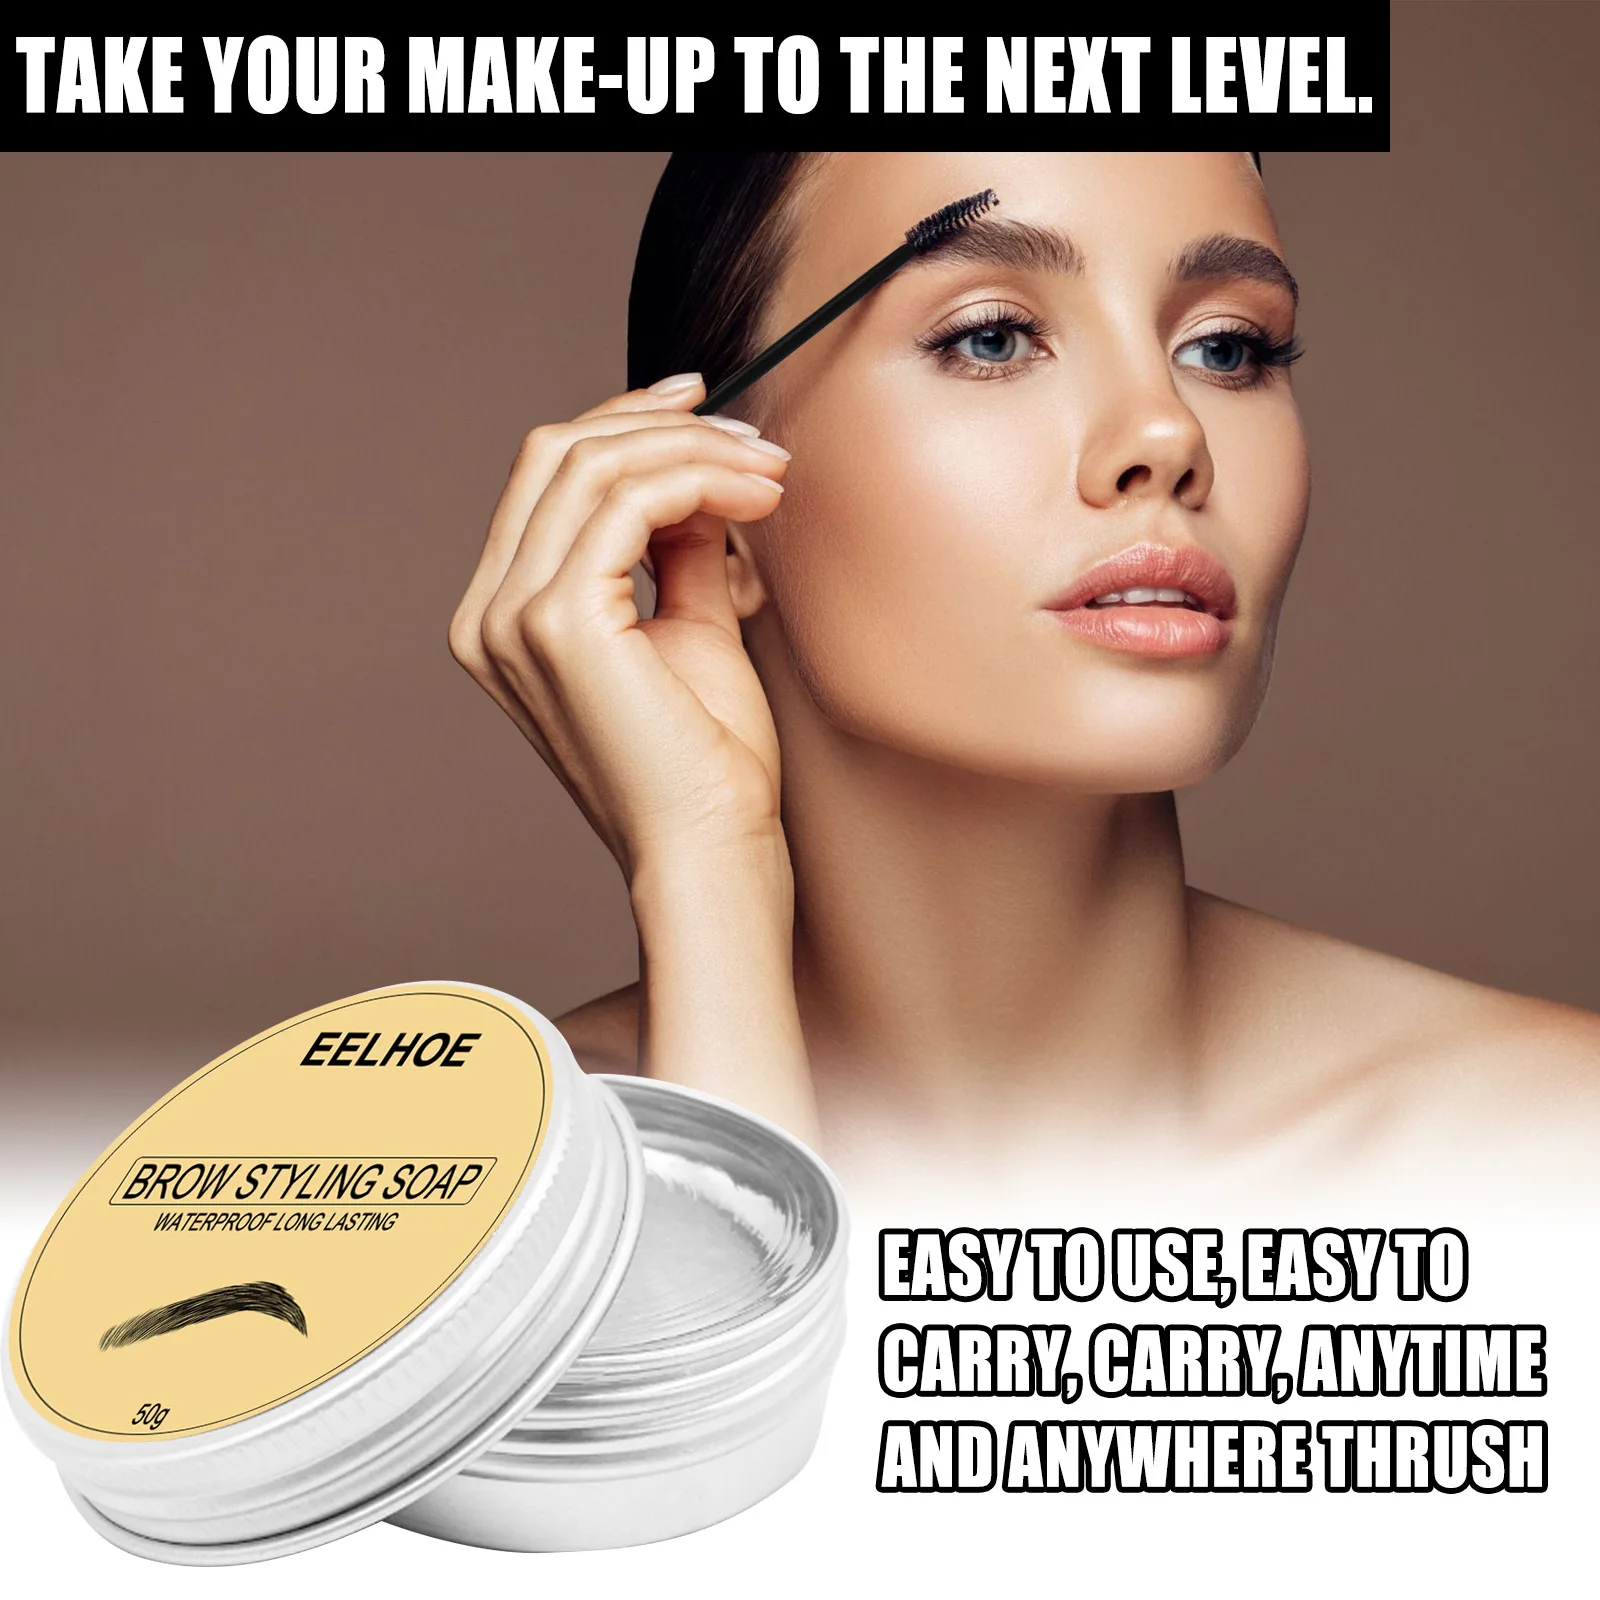 EELHOE 50g Eyebrow Cream Colorless and Transparent Refreshing and Lasting Natural Makeup Brow Styling Brow Brush Free Shipping